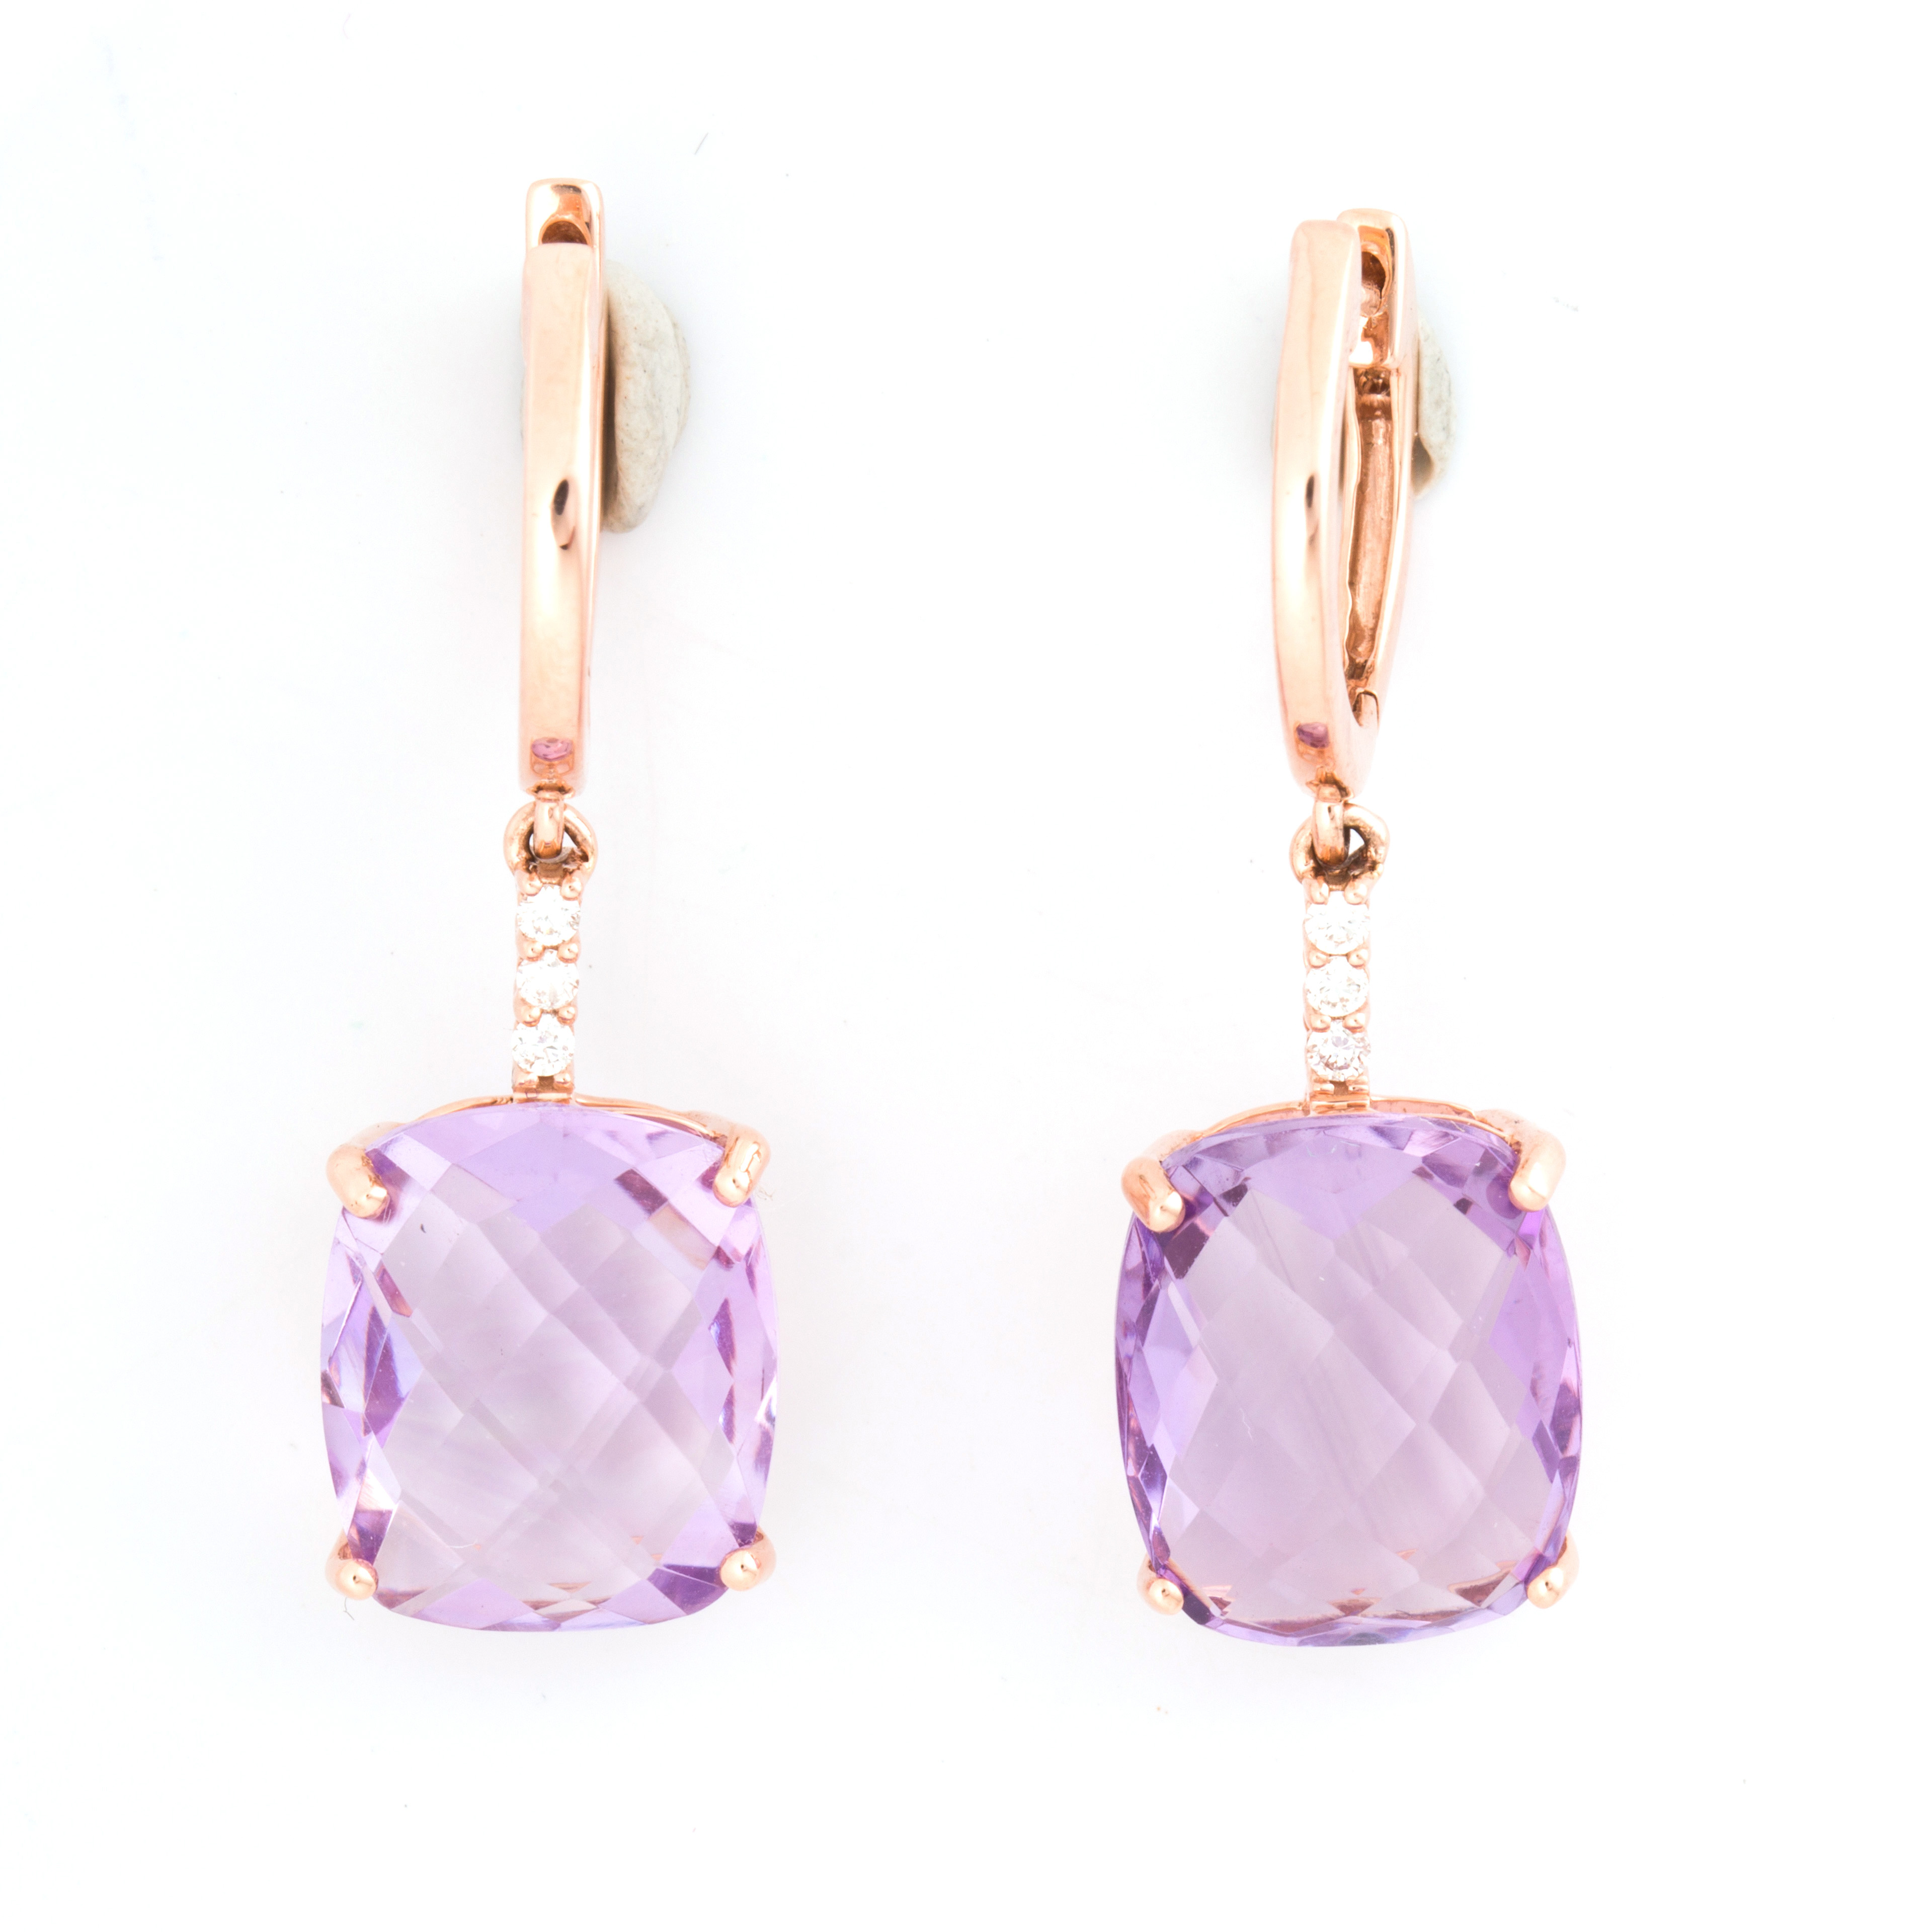 A PAIR OF AMETHYST DIAMOND AND 3a6a51